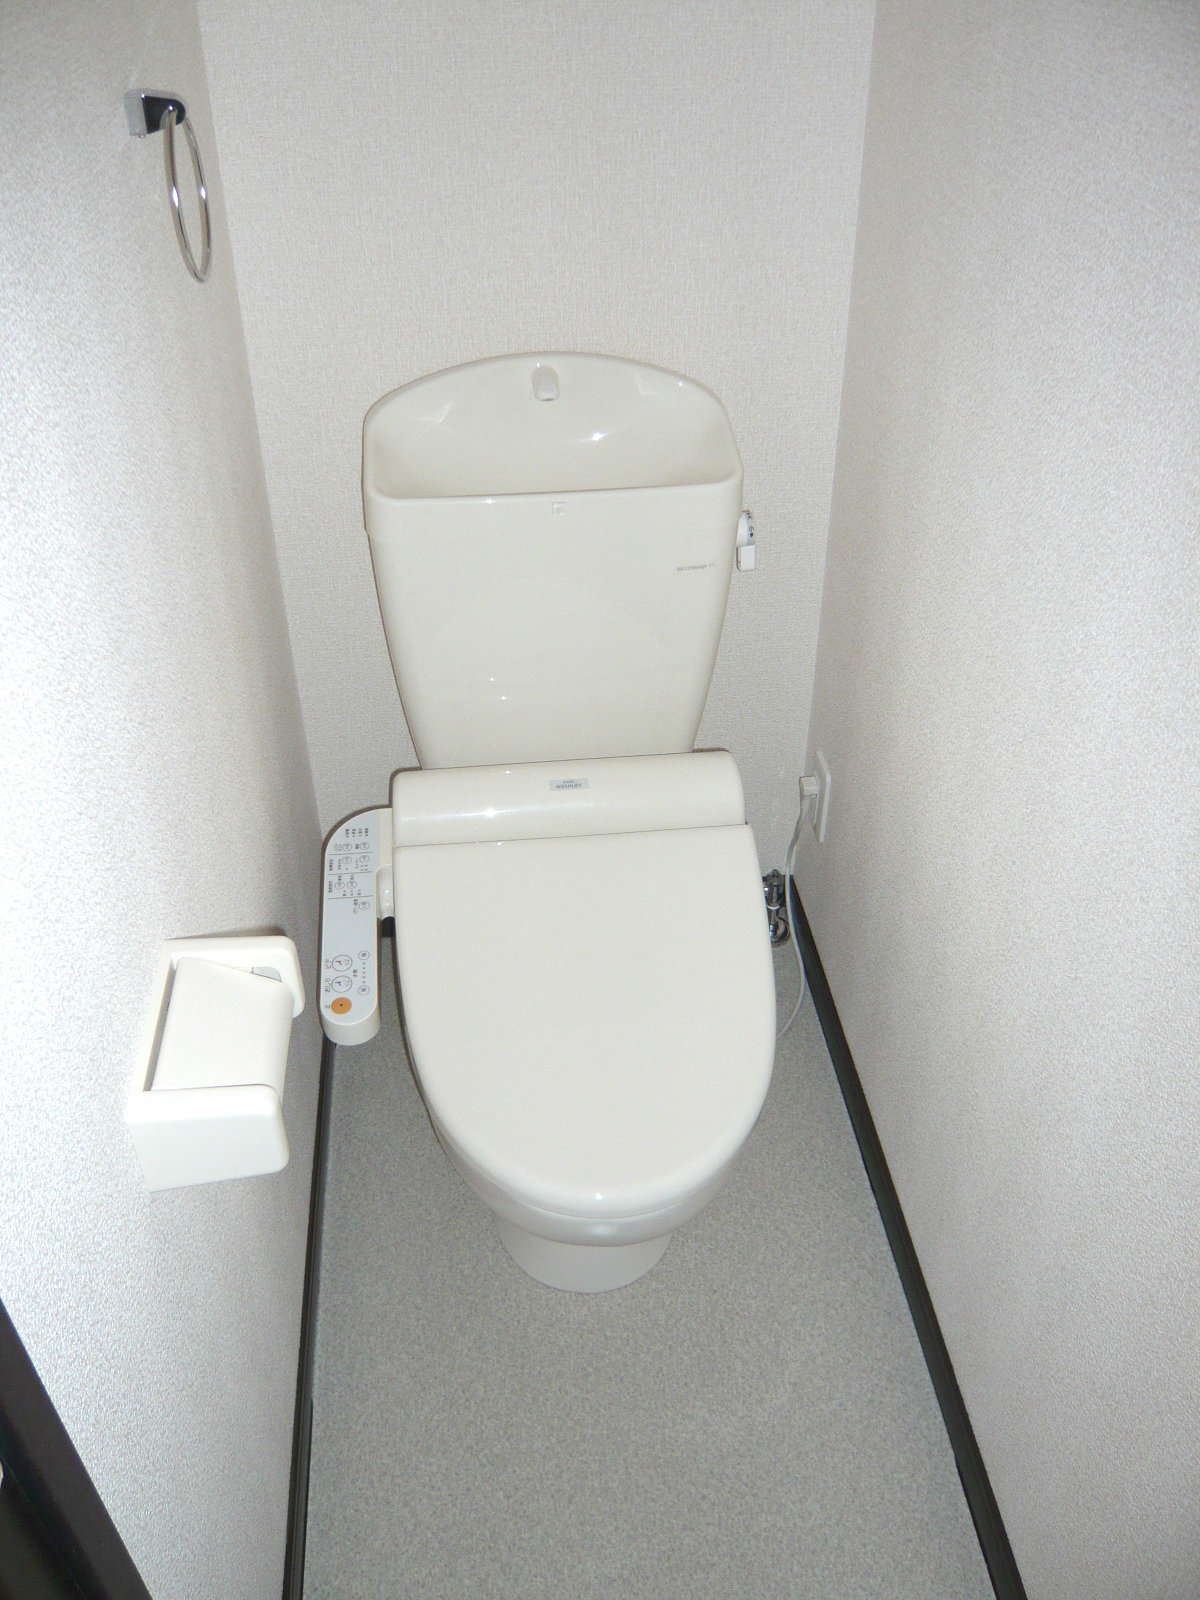 Toilet. Of course, it is with warm water washing toilet seat